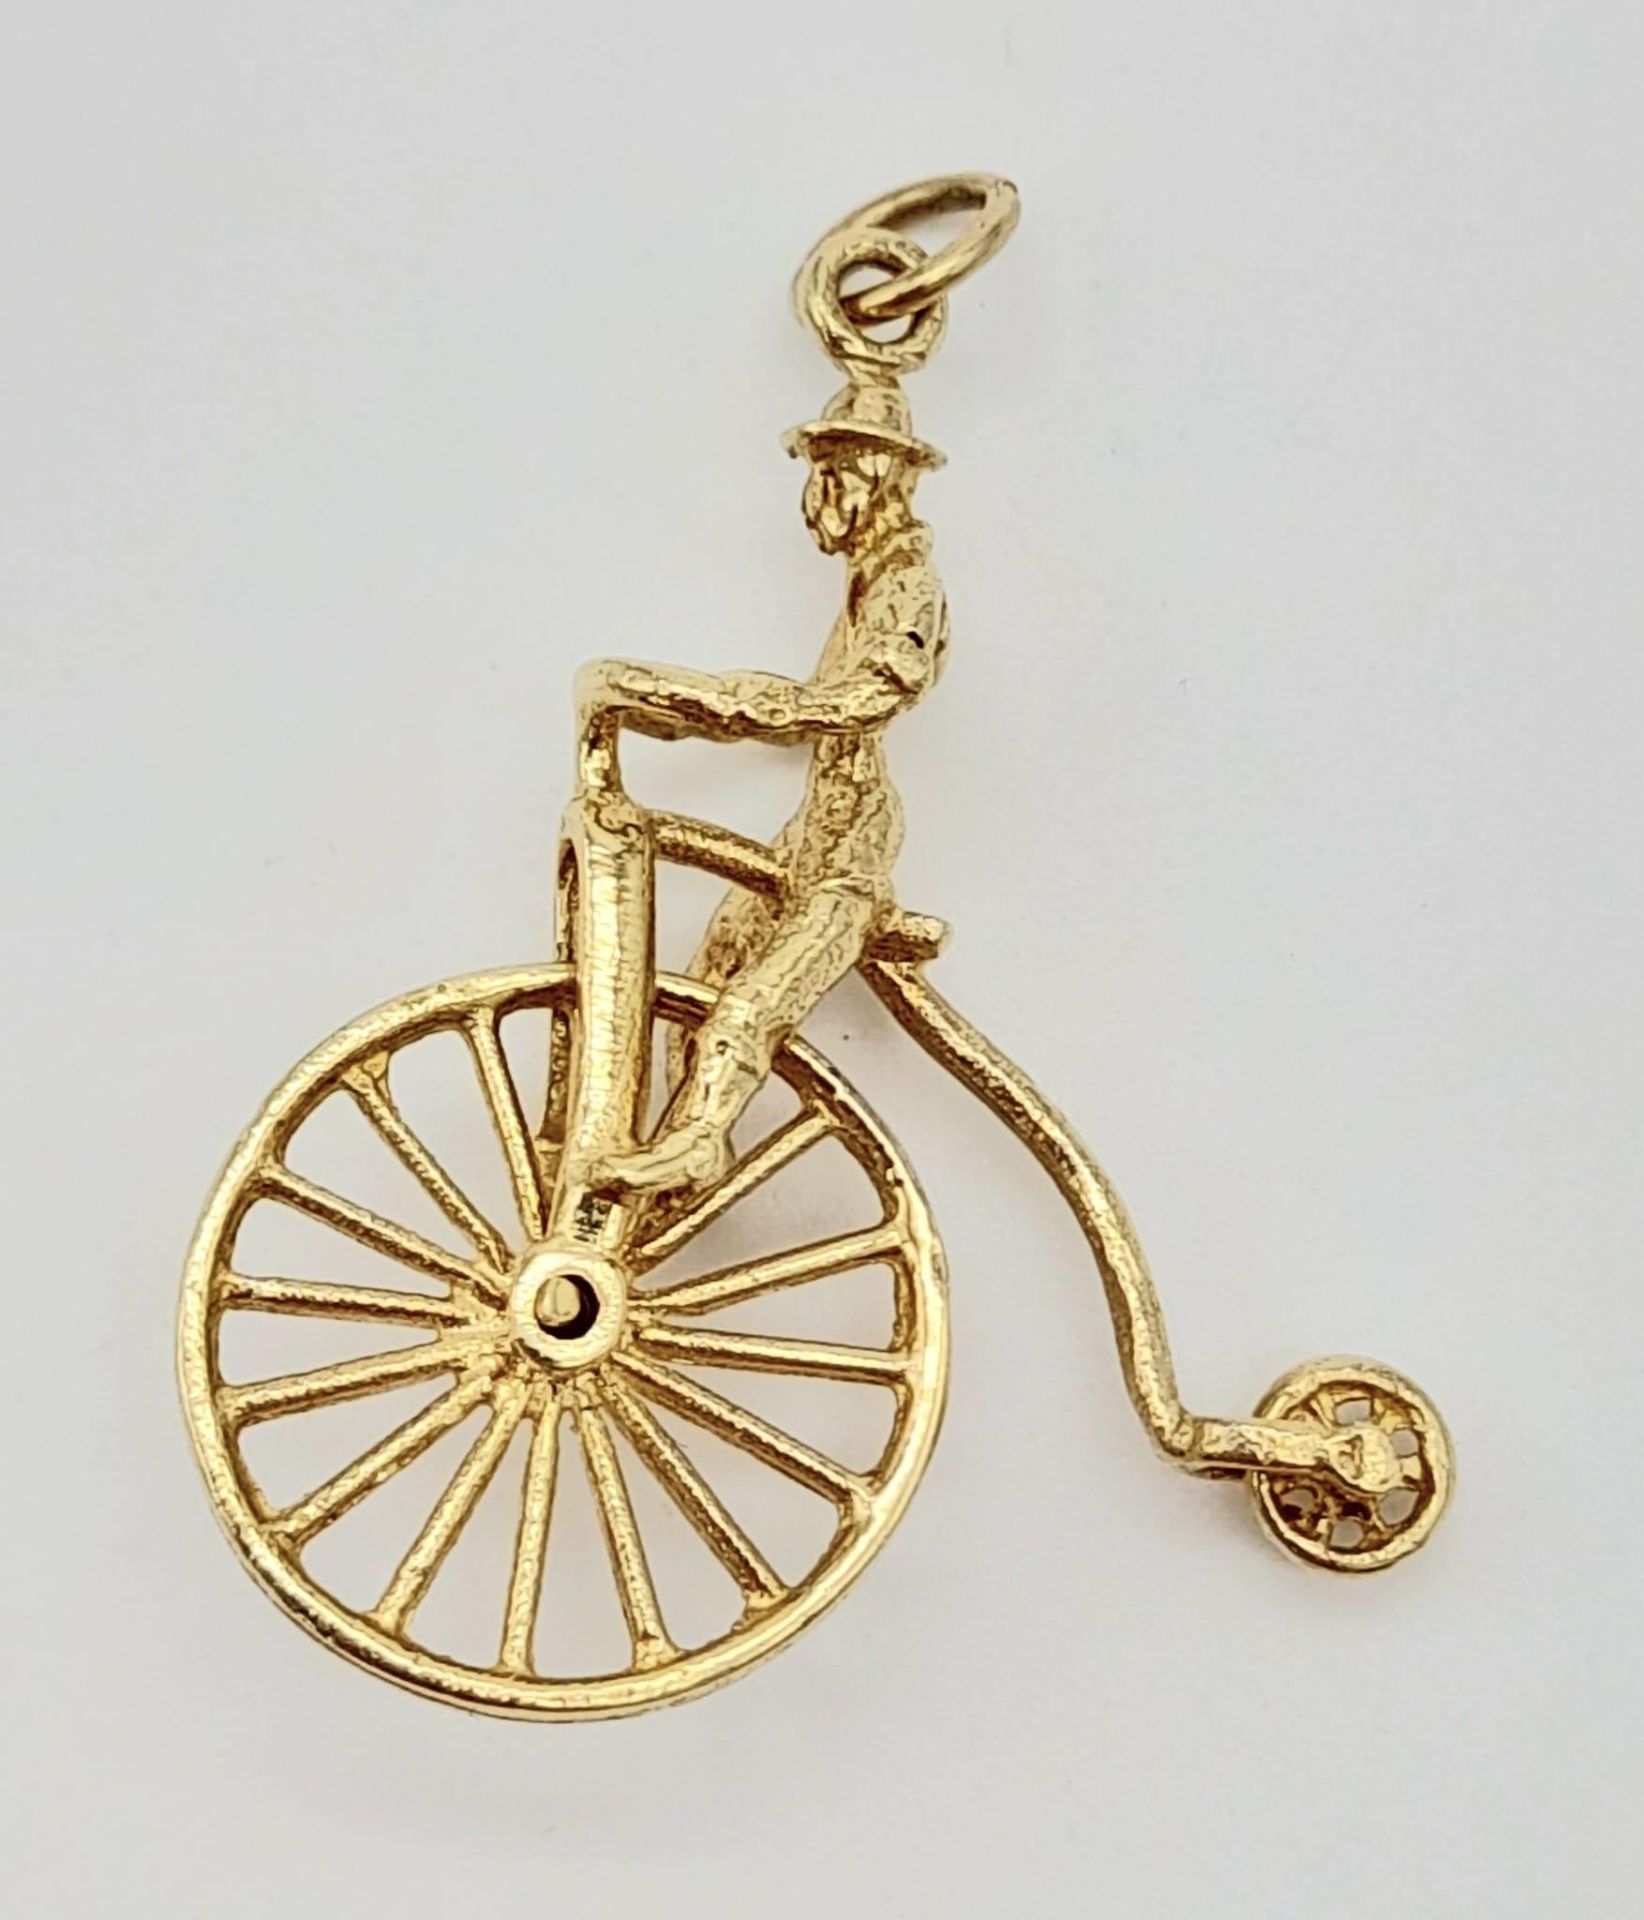 9K YELLOW GOLD PENNY FARTHING CHARM. 3.7G